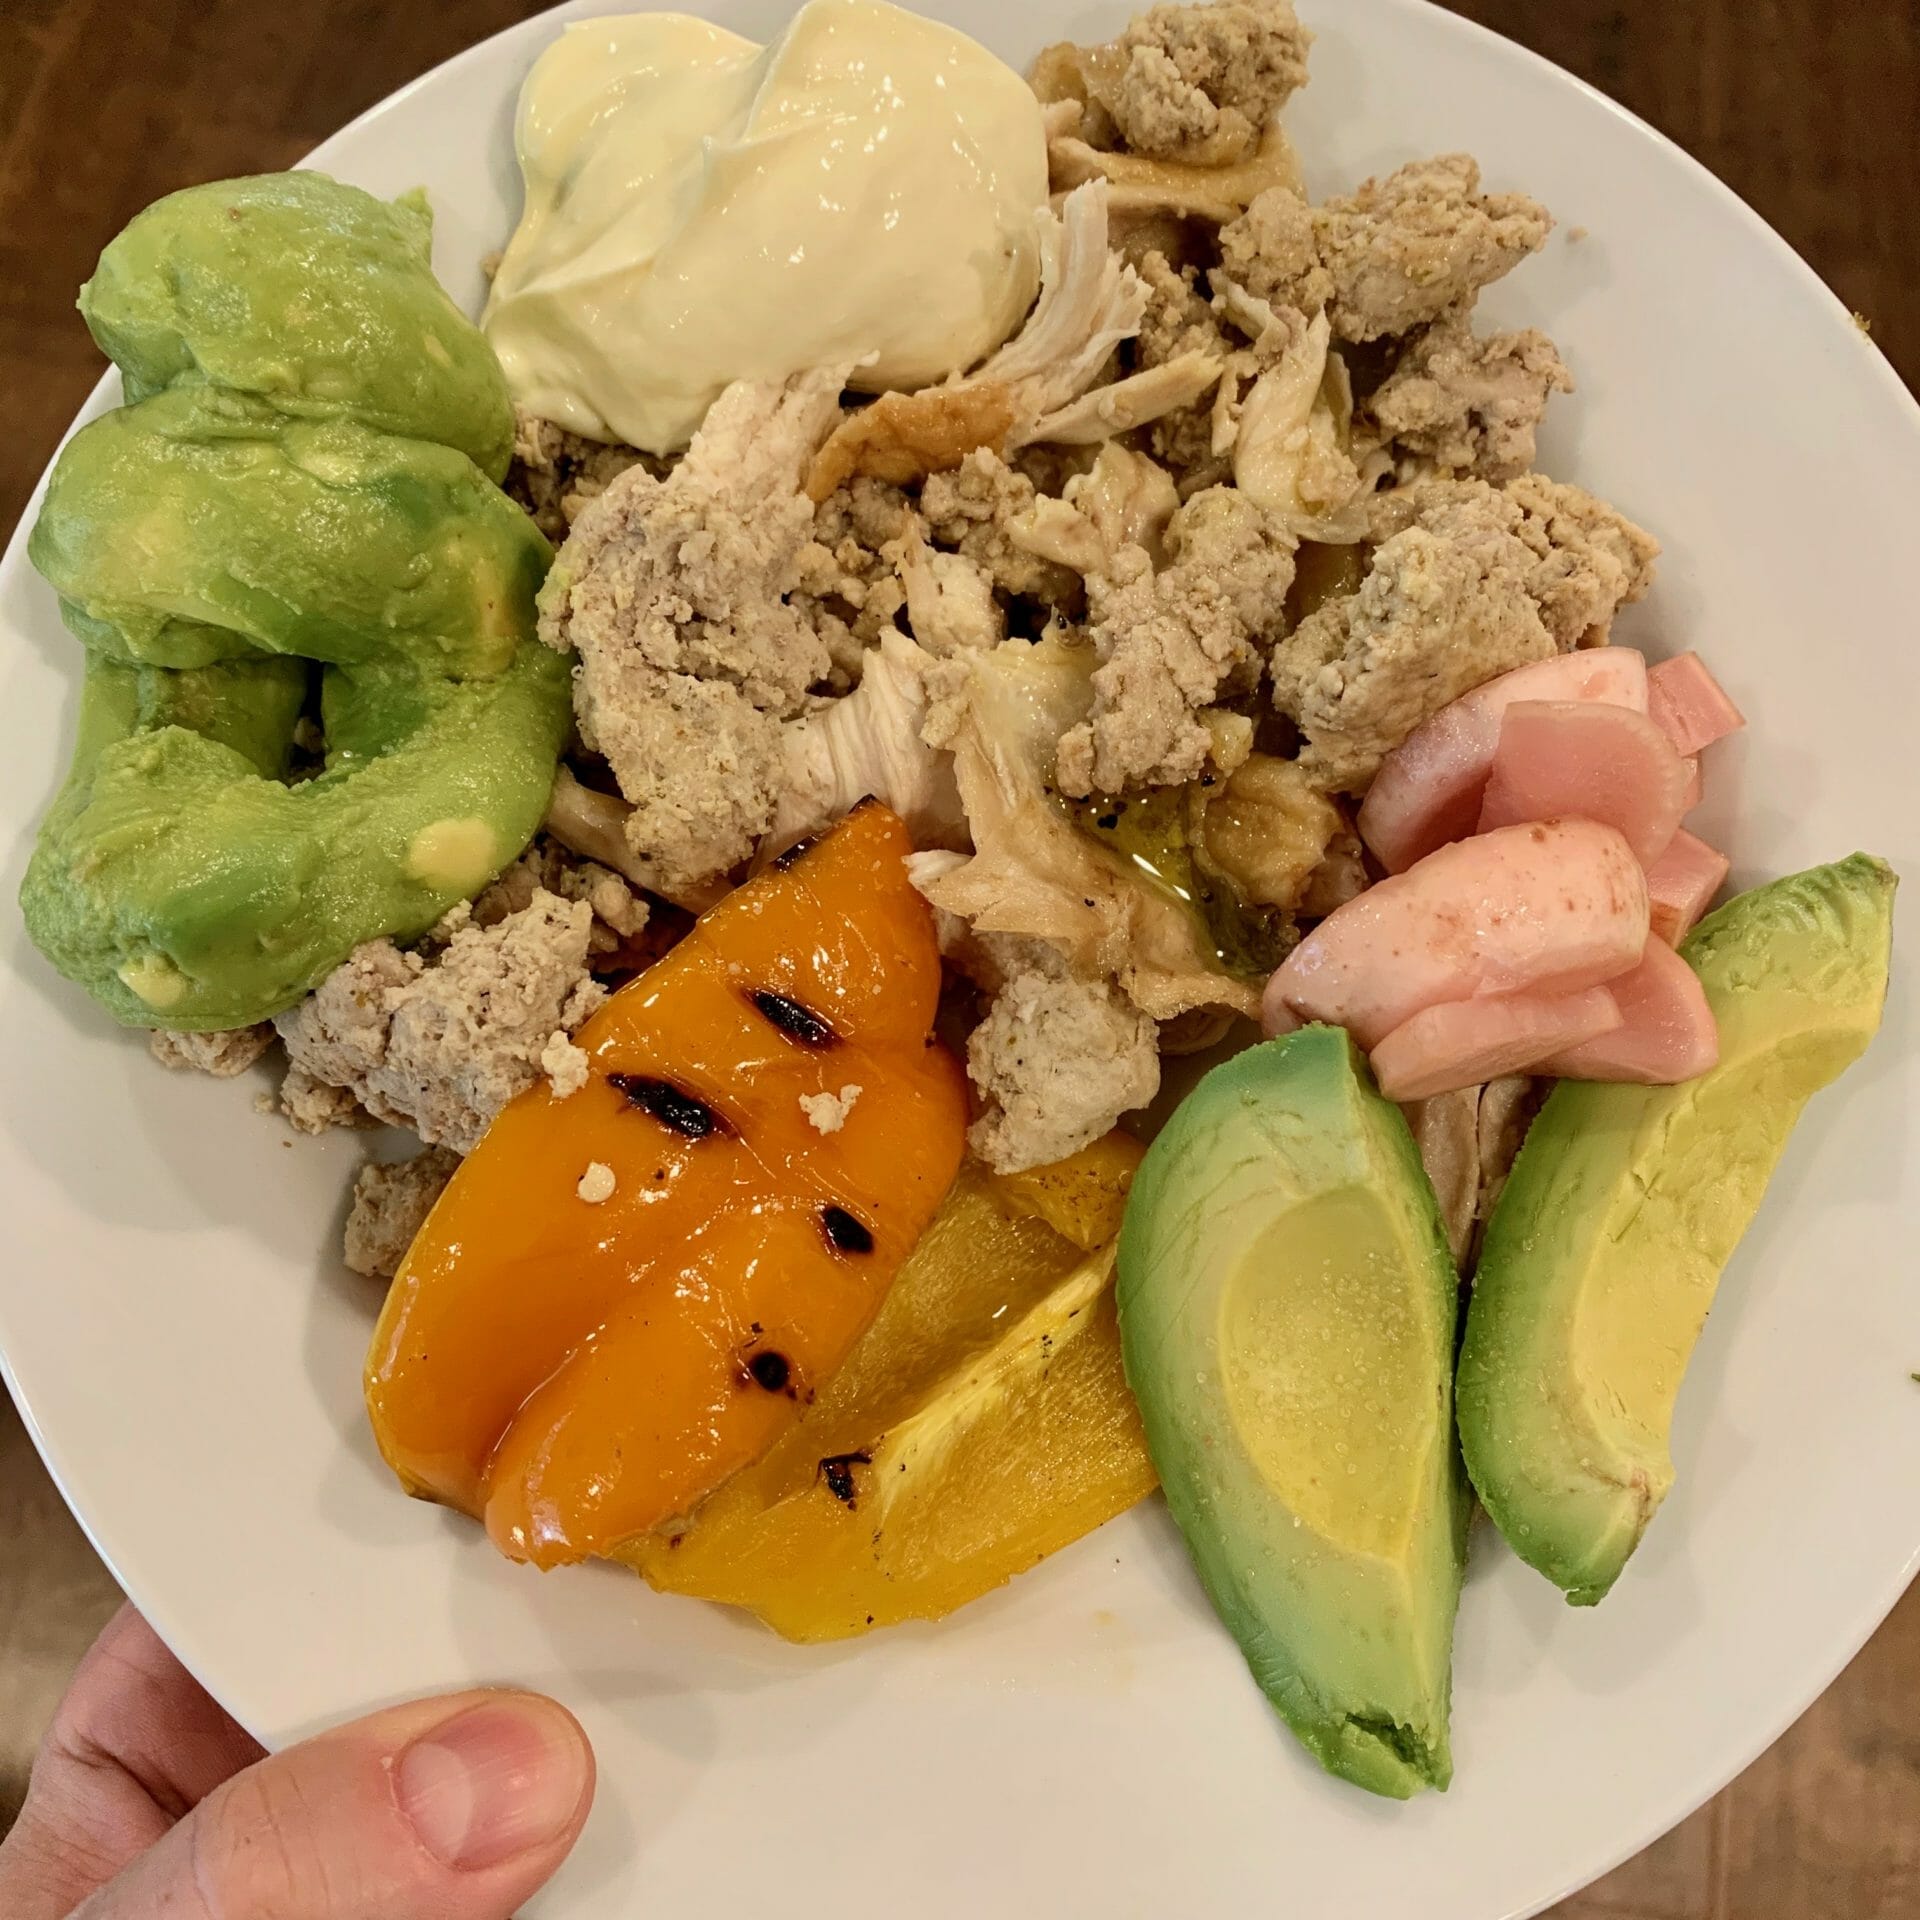 Plate consisting of leftovers: organic rotisserie chicken, ground turkey, grilled peppers, avocado, guacamole and a lot of mayonnaise